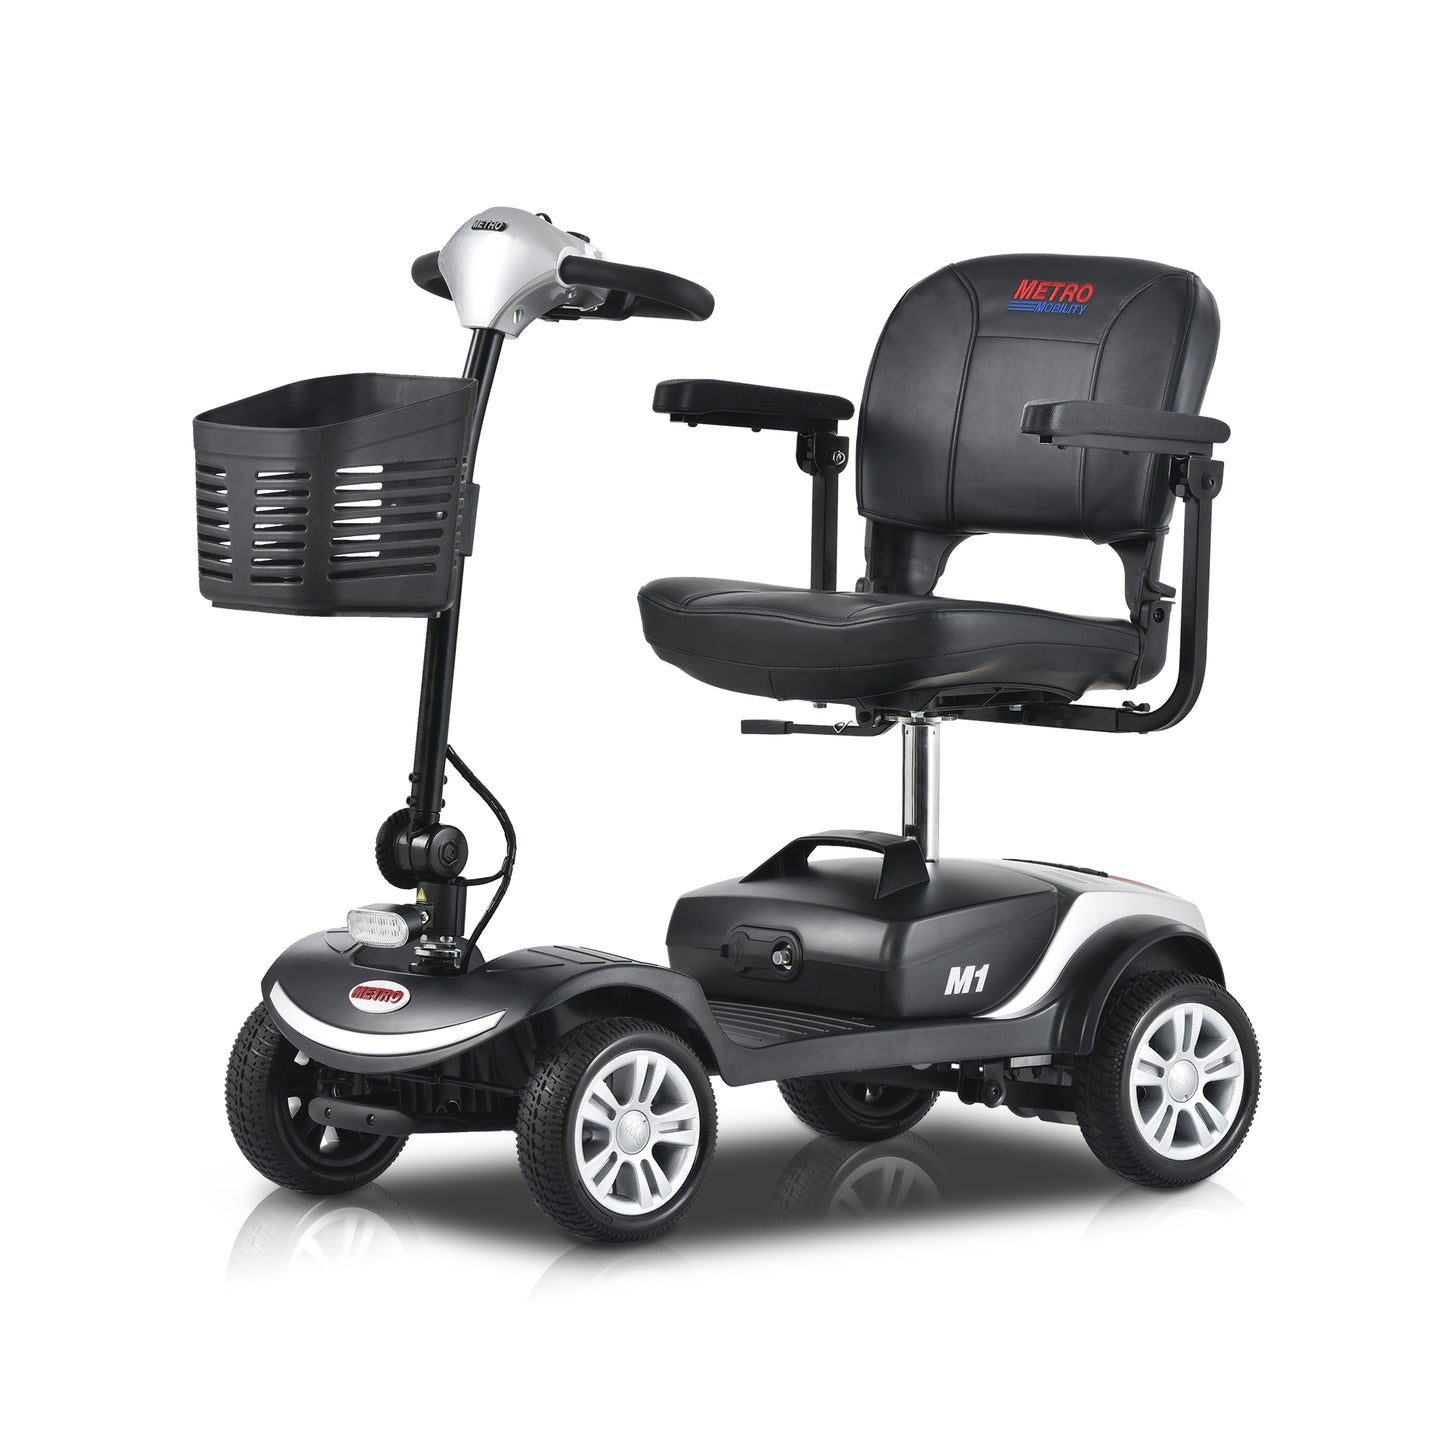 Silver Metromobility M1 Portal 4-Wheel Mobility Scooter | Compact Travel Power Mobility Scooter